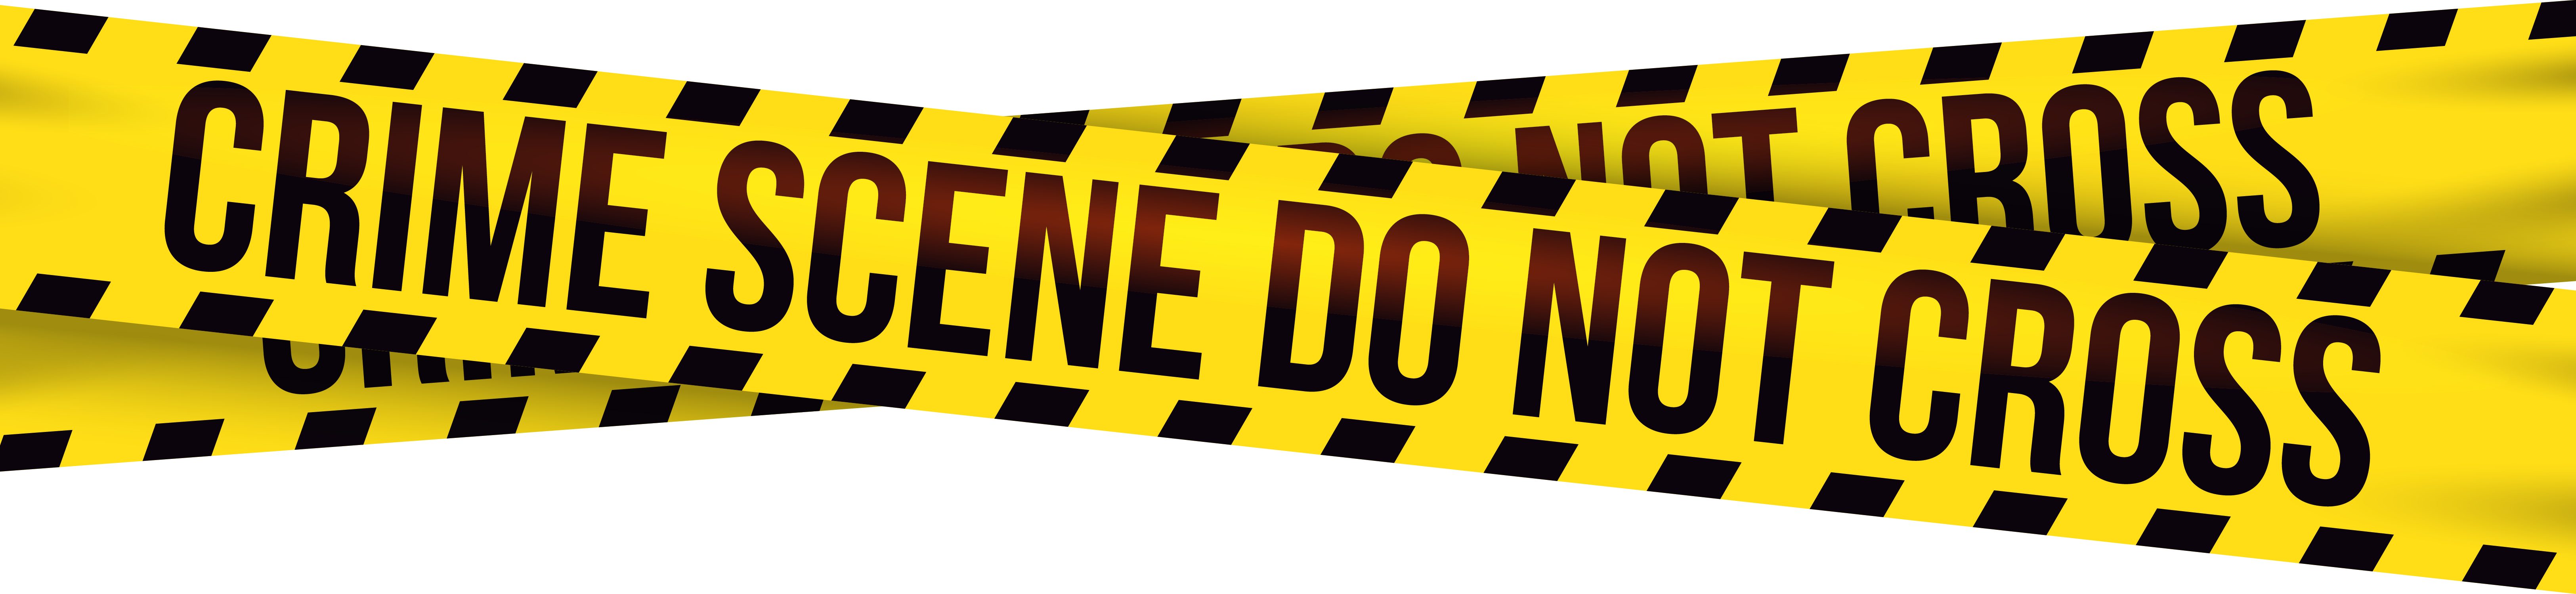 Barricade png clip art. Caution clipart police tape